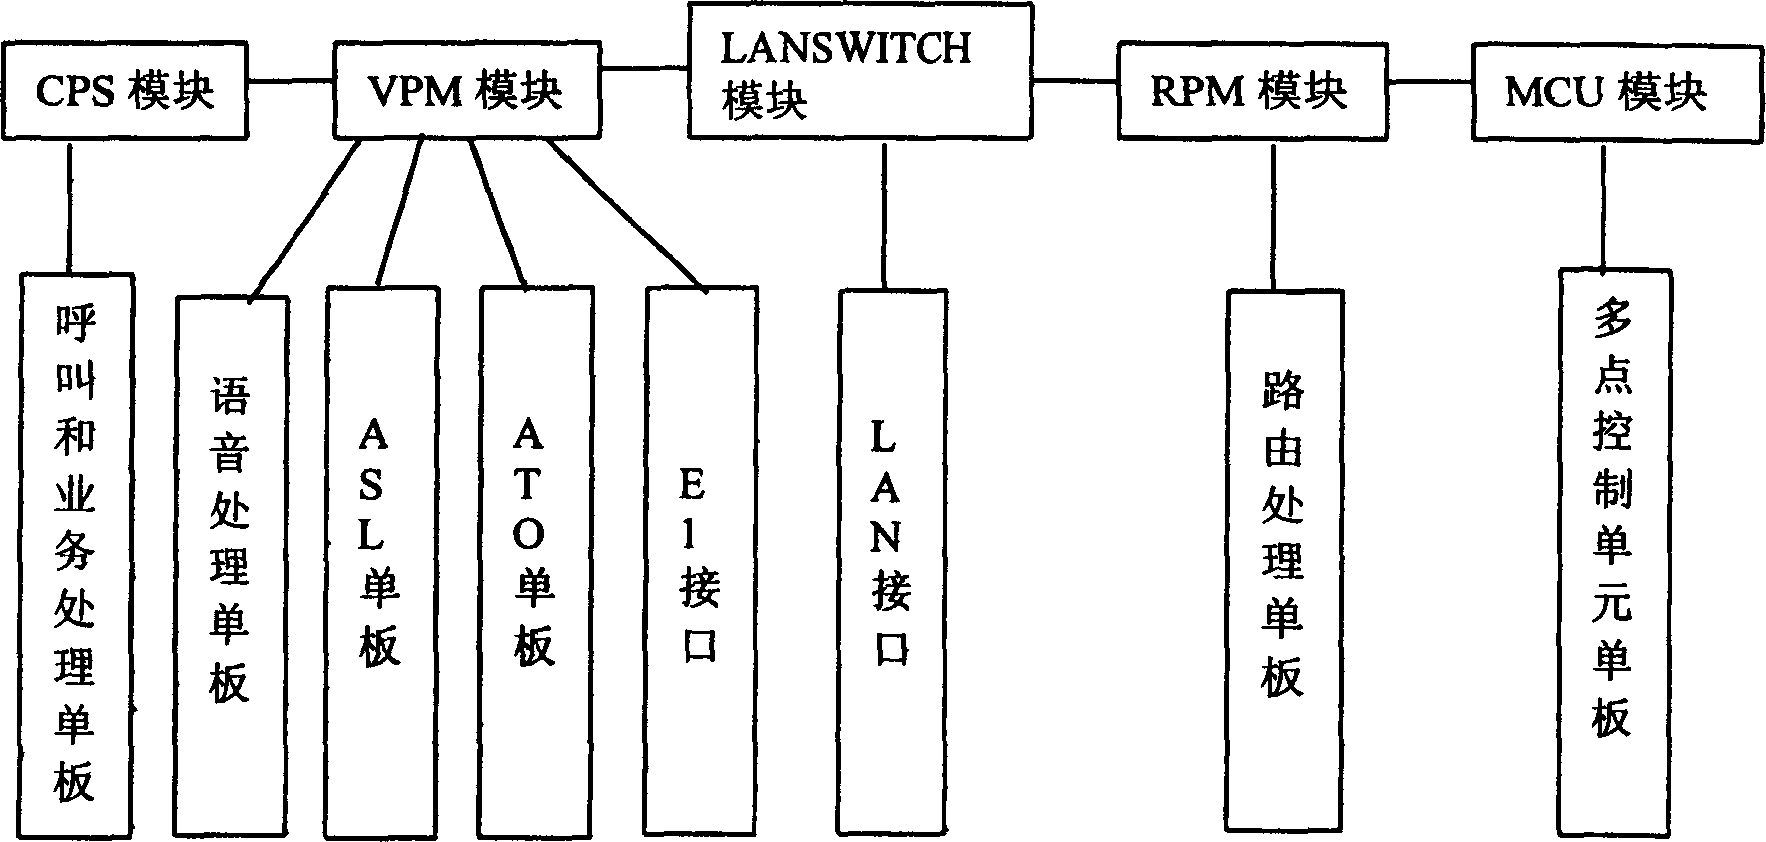 Comprehensive data and phonetic communication system